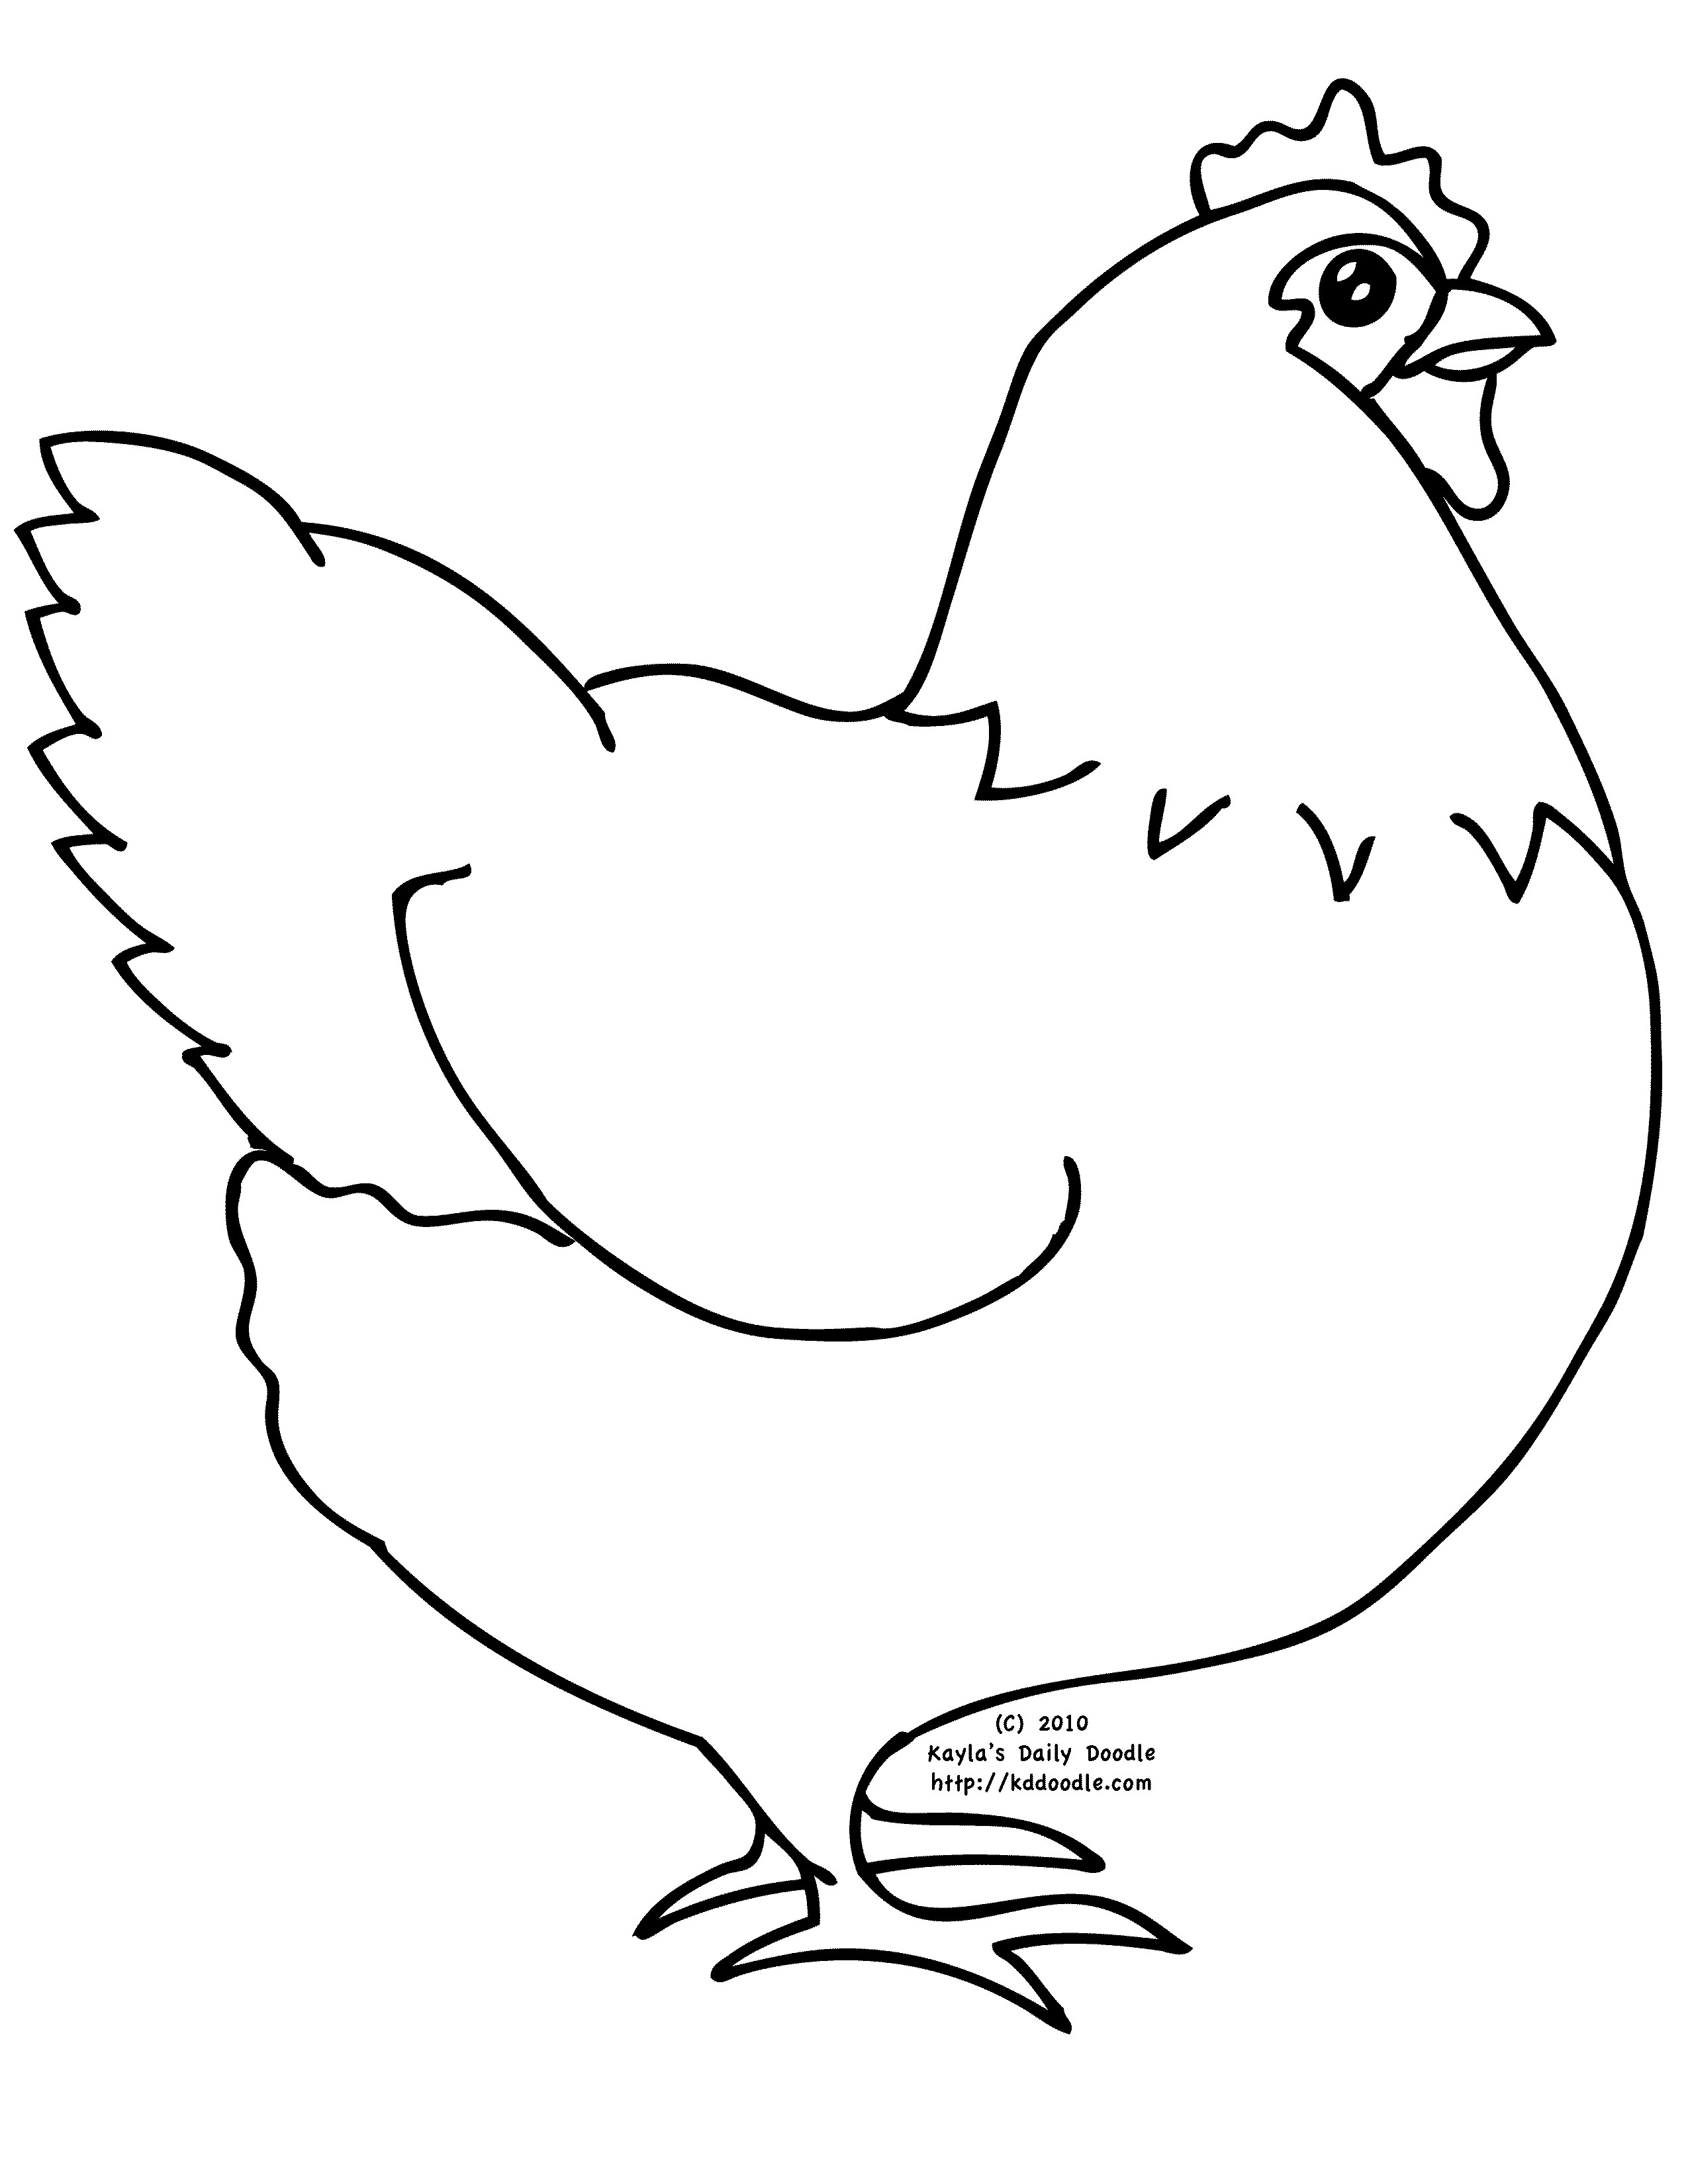 The Little Red Hen Coloring Pages Coloring Pages Coloring Pages Little Red Hen Lovely Free Printable